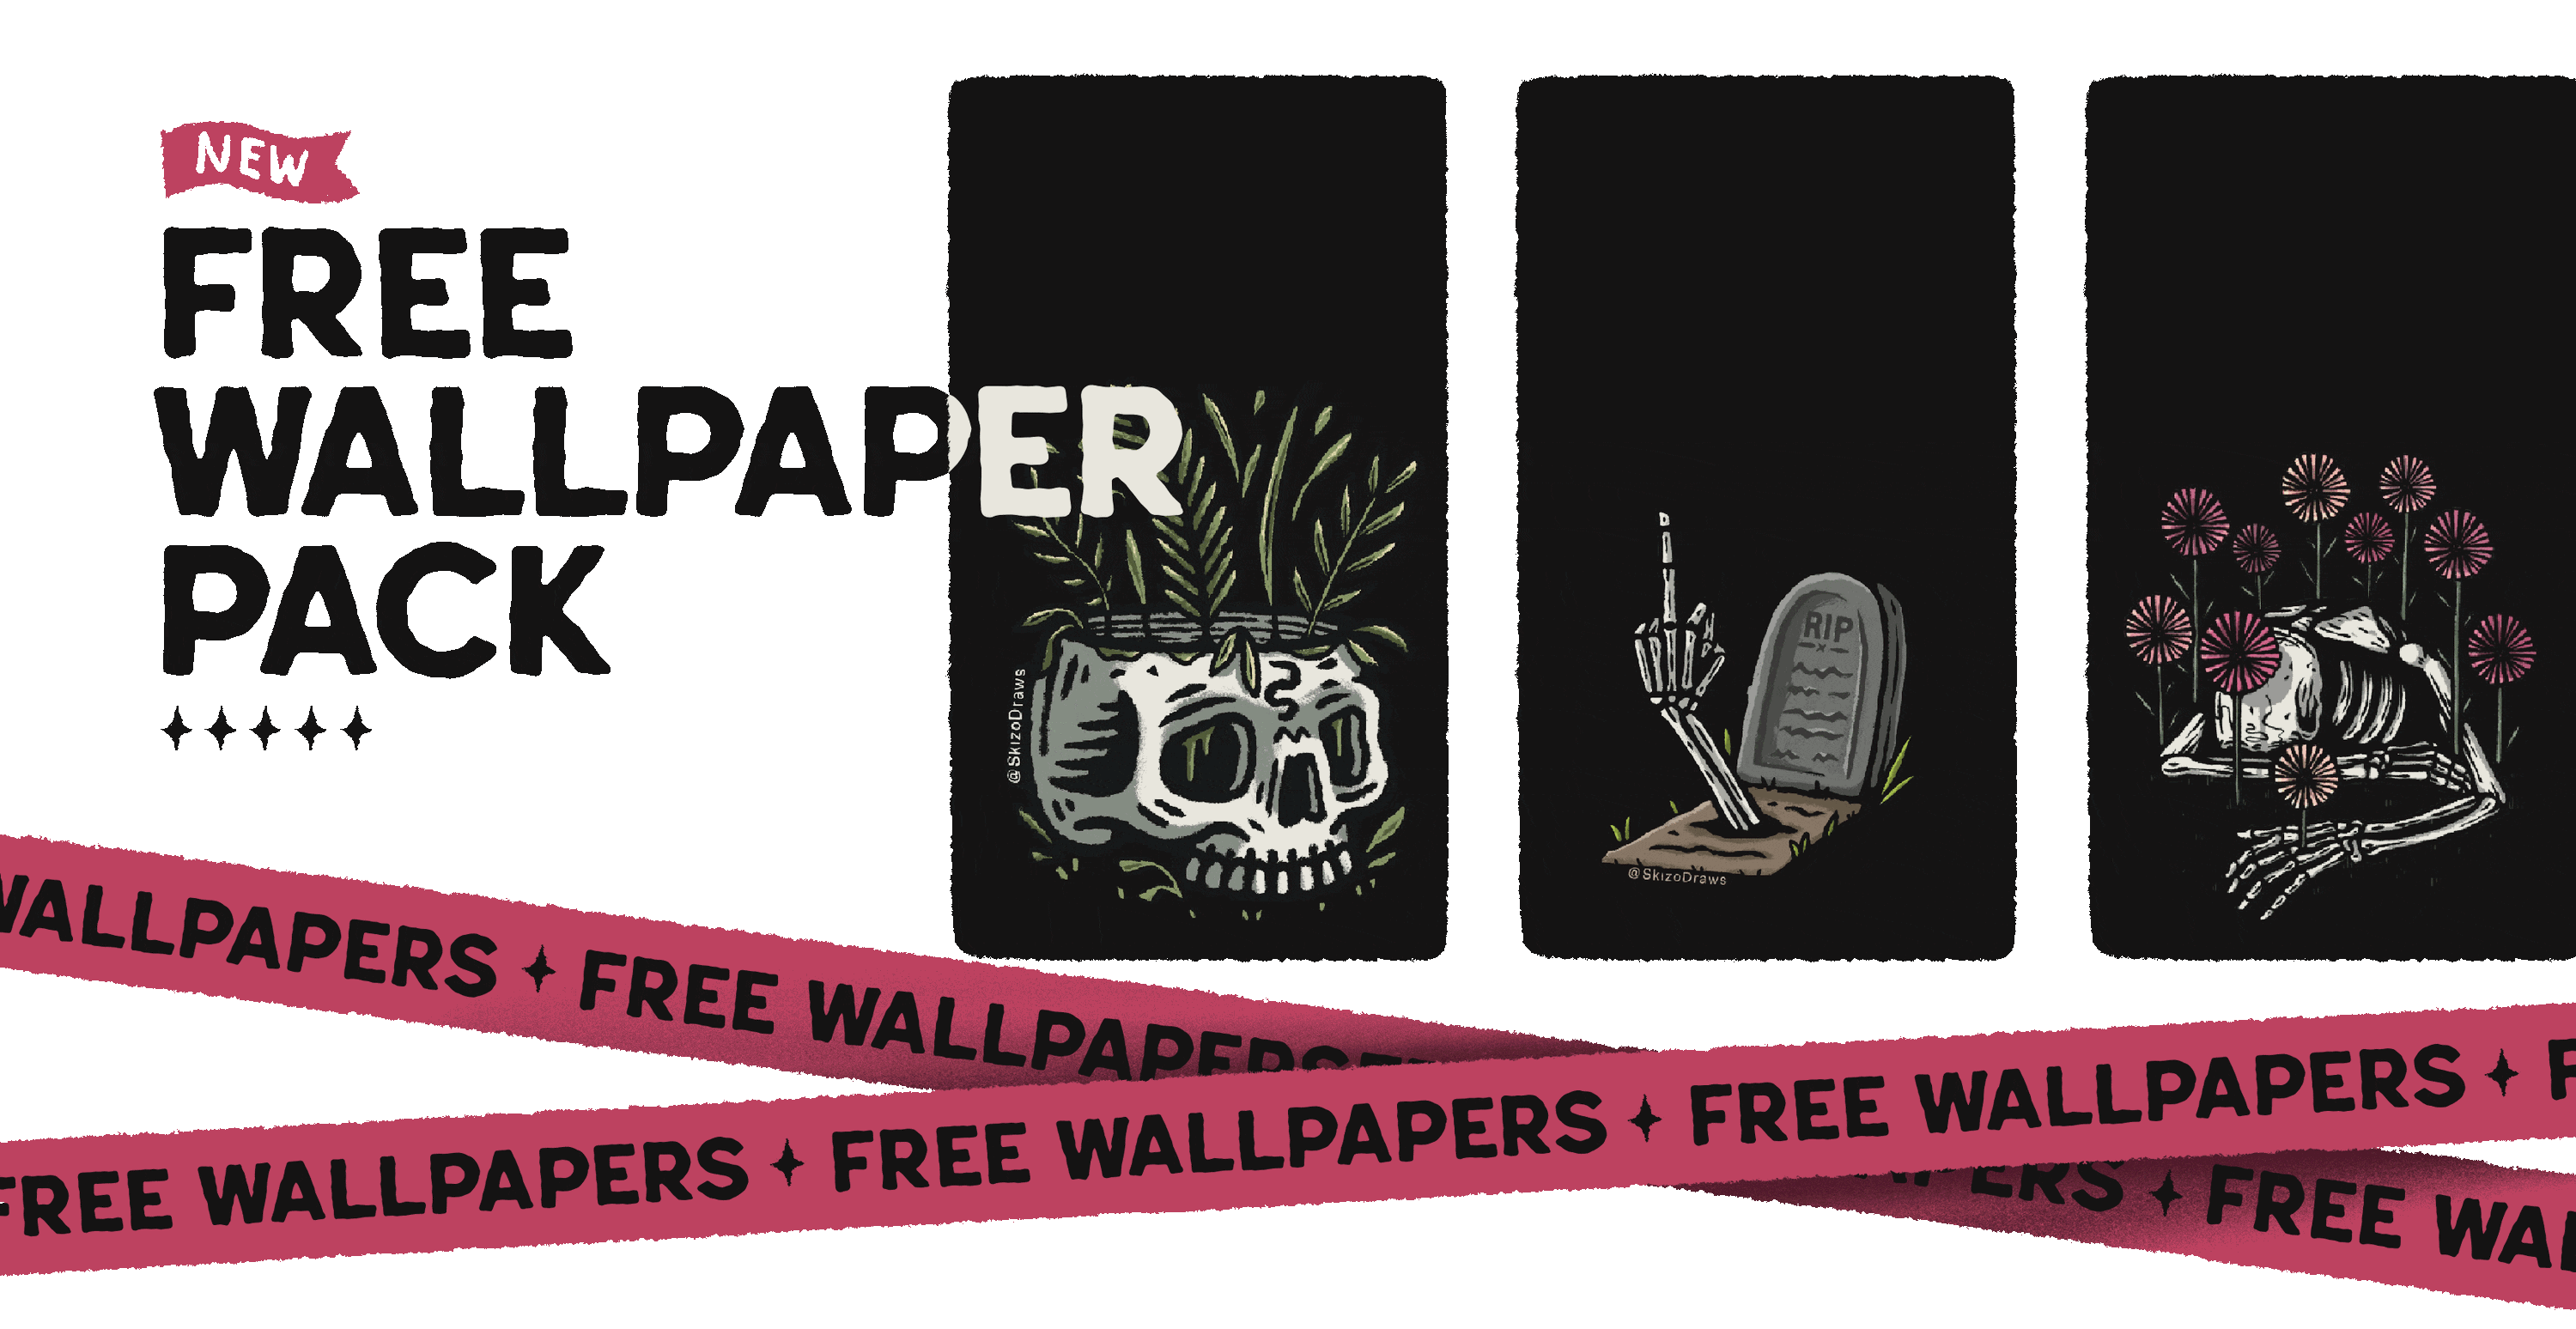 New Free Wallpaper Pack - Download 80+ Free wallpapers to customize your mobile phone now